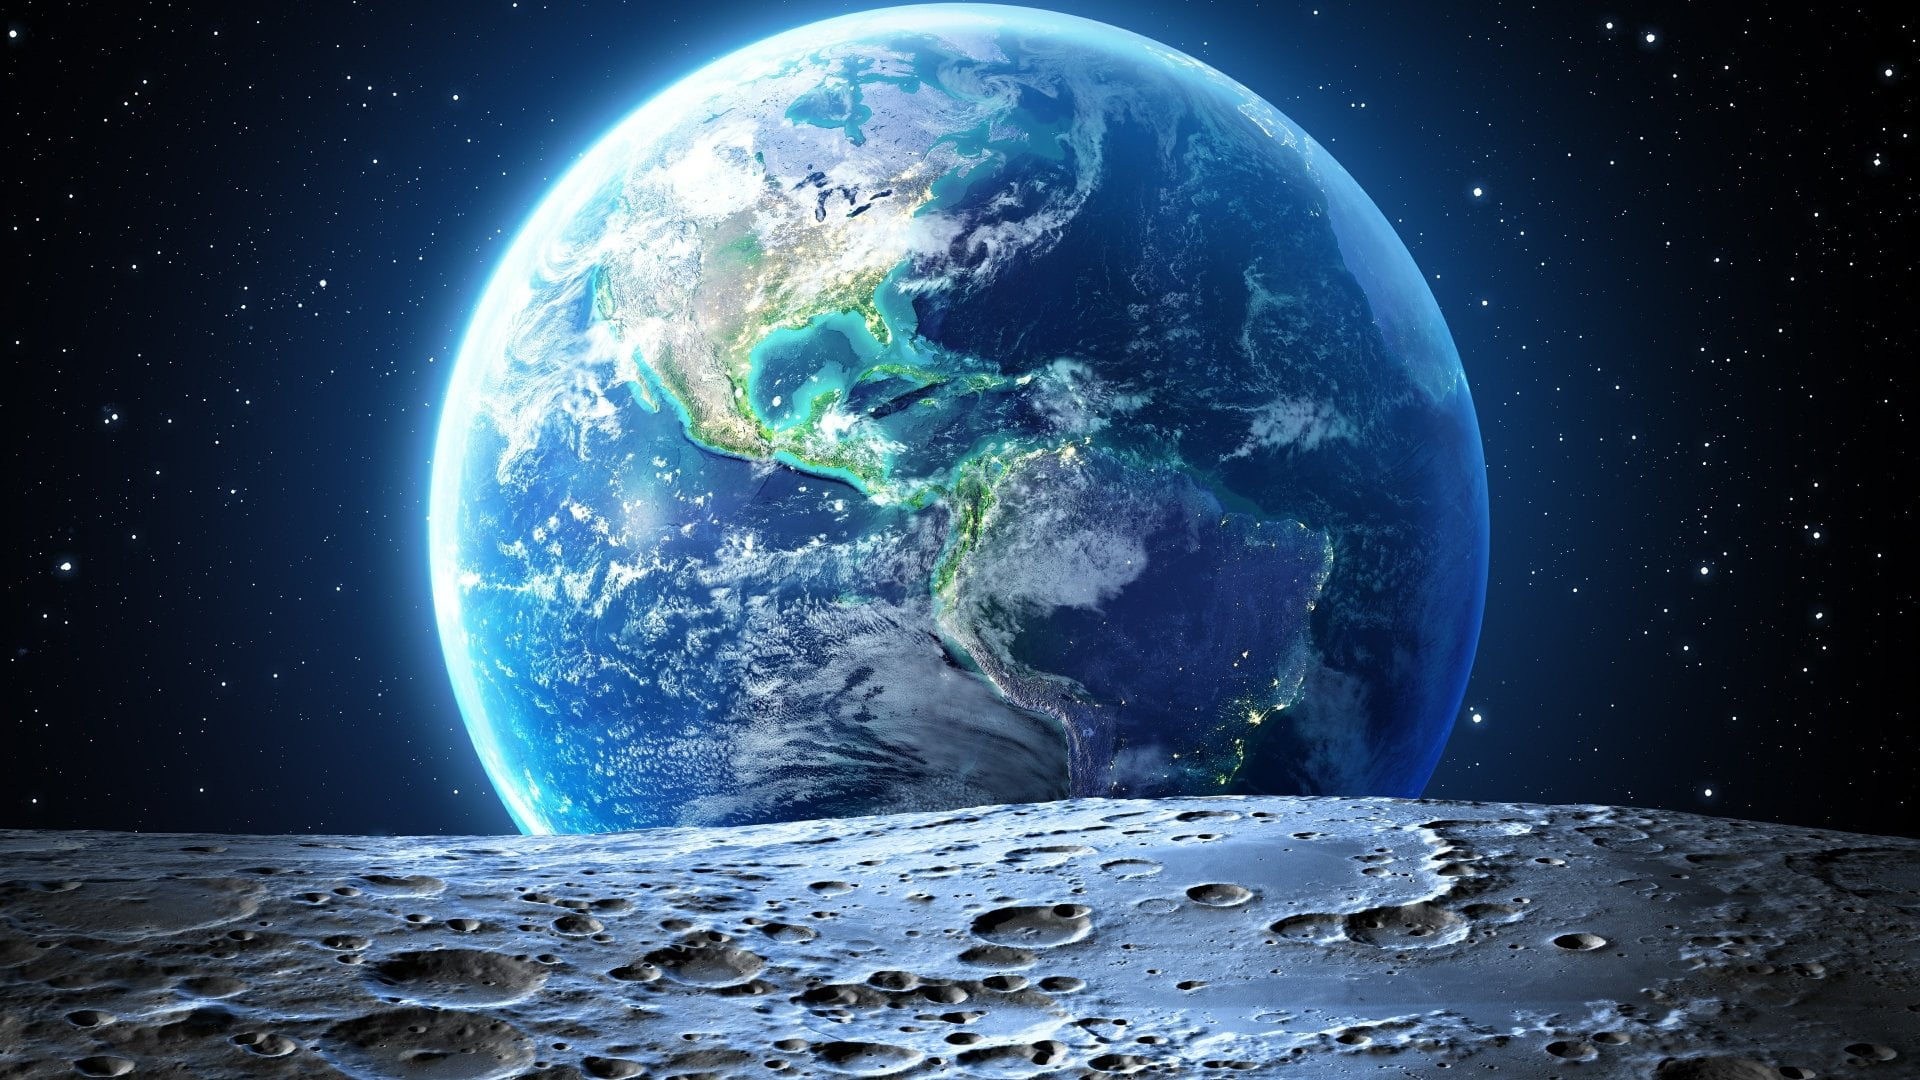 Earth, From Space, Crater, Moon, Stars, planet earth, planet - space